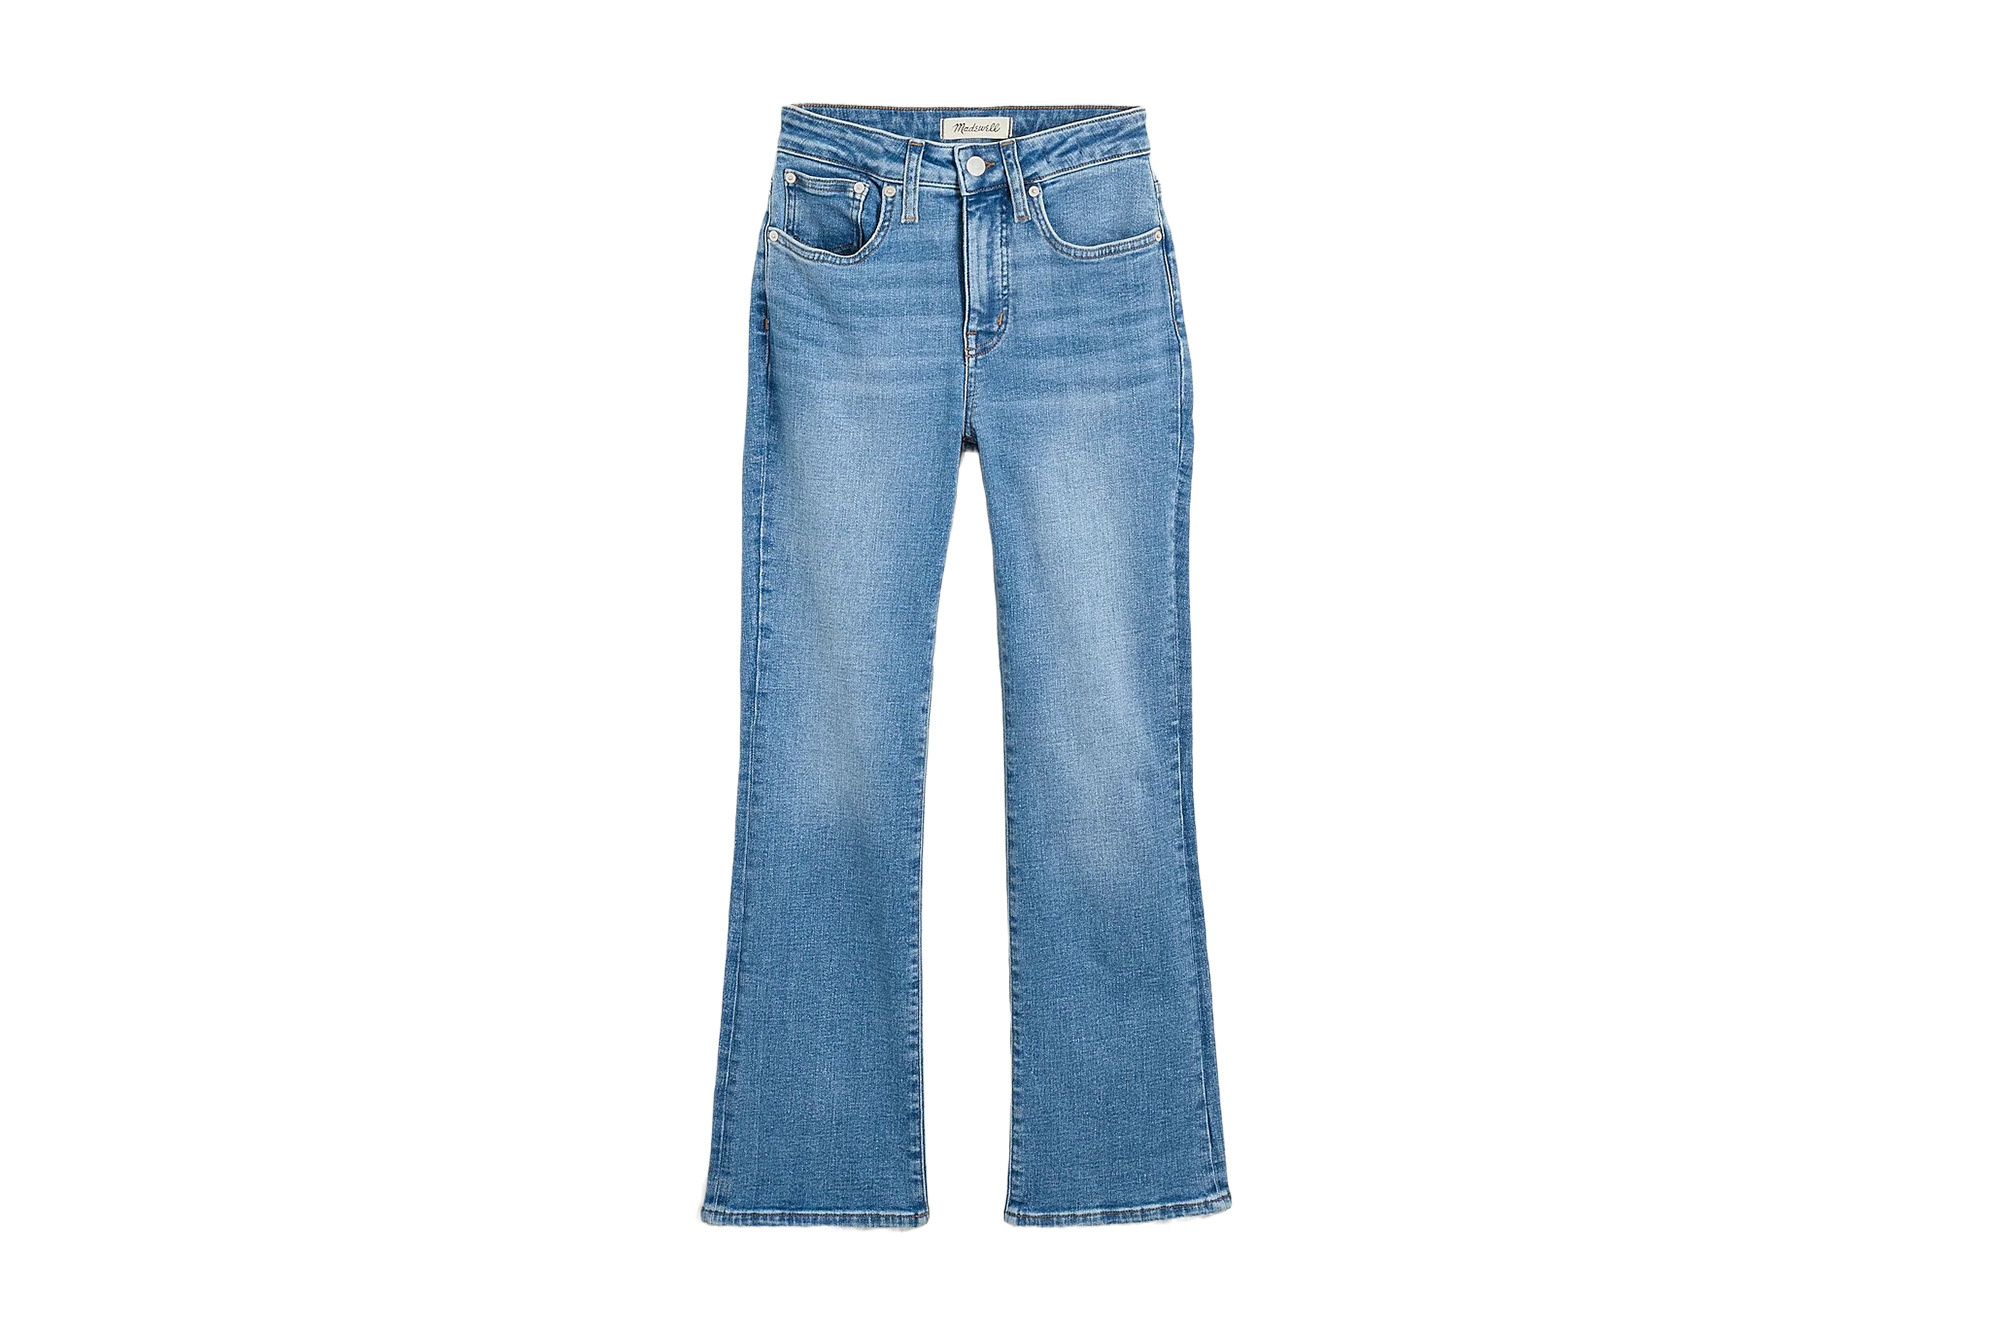 A pair of Madewell curvy jeans